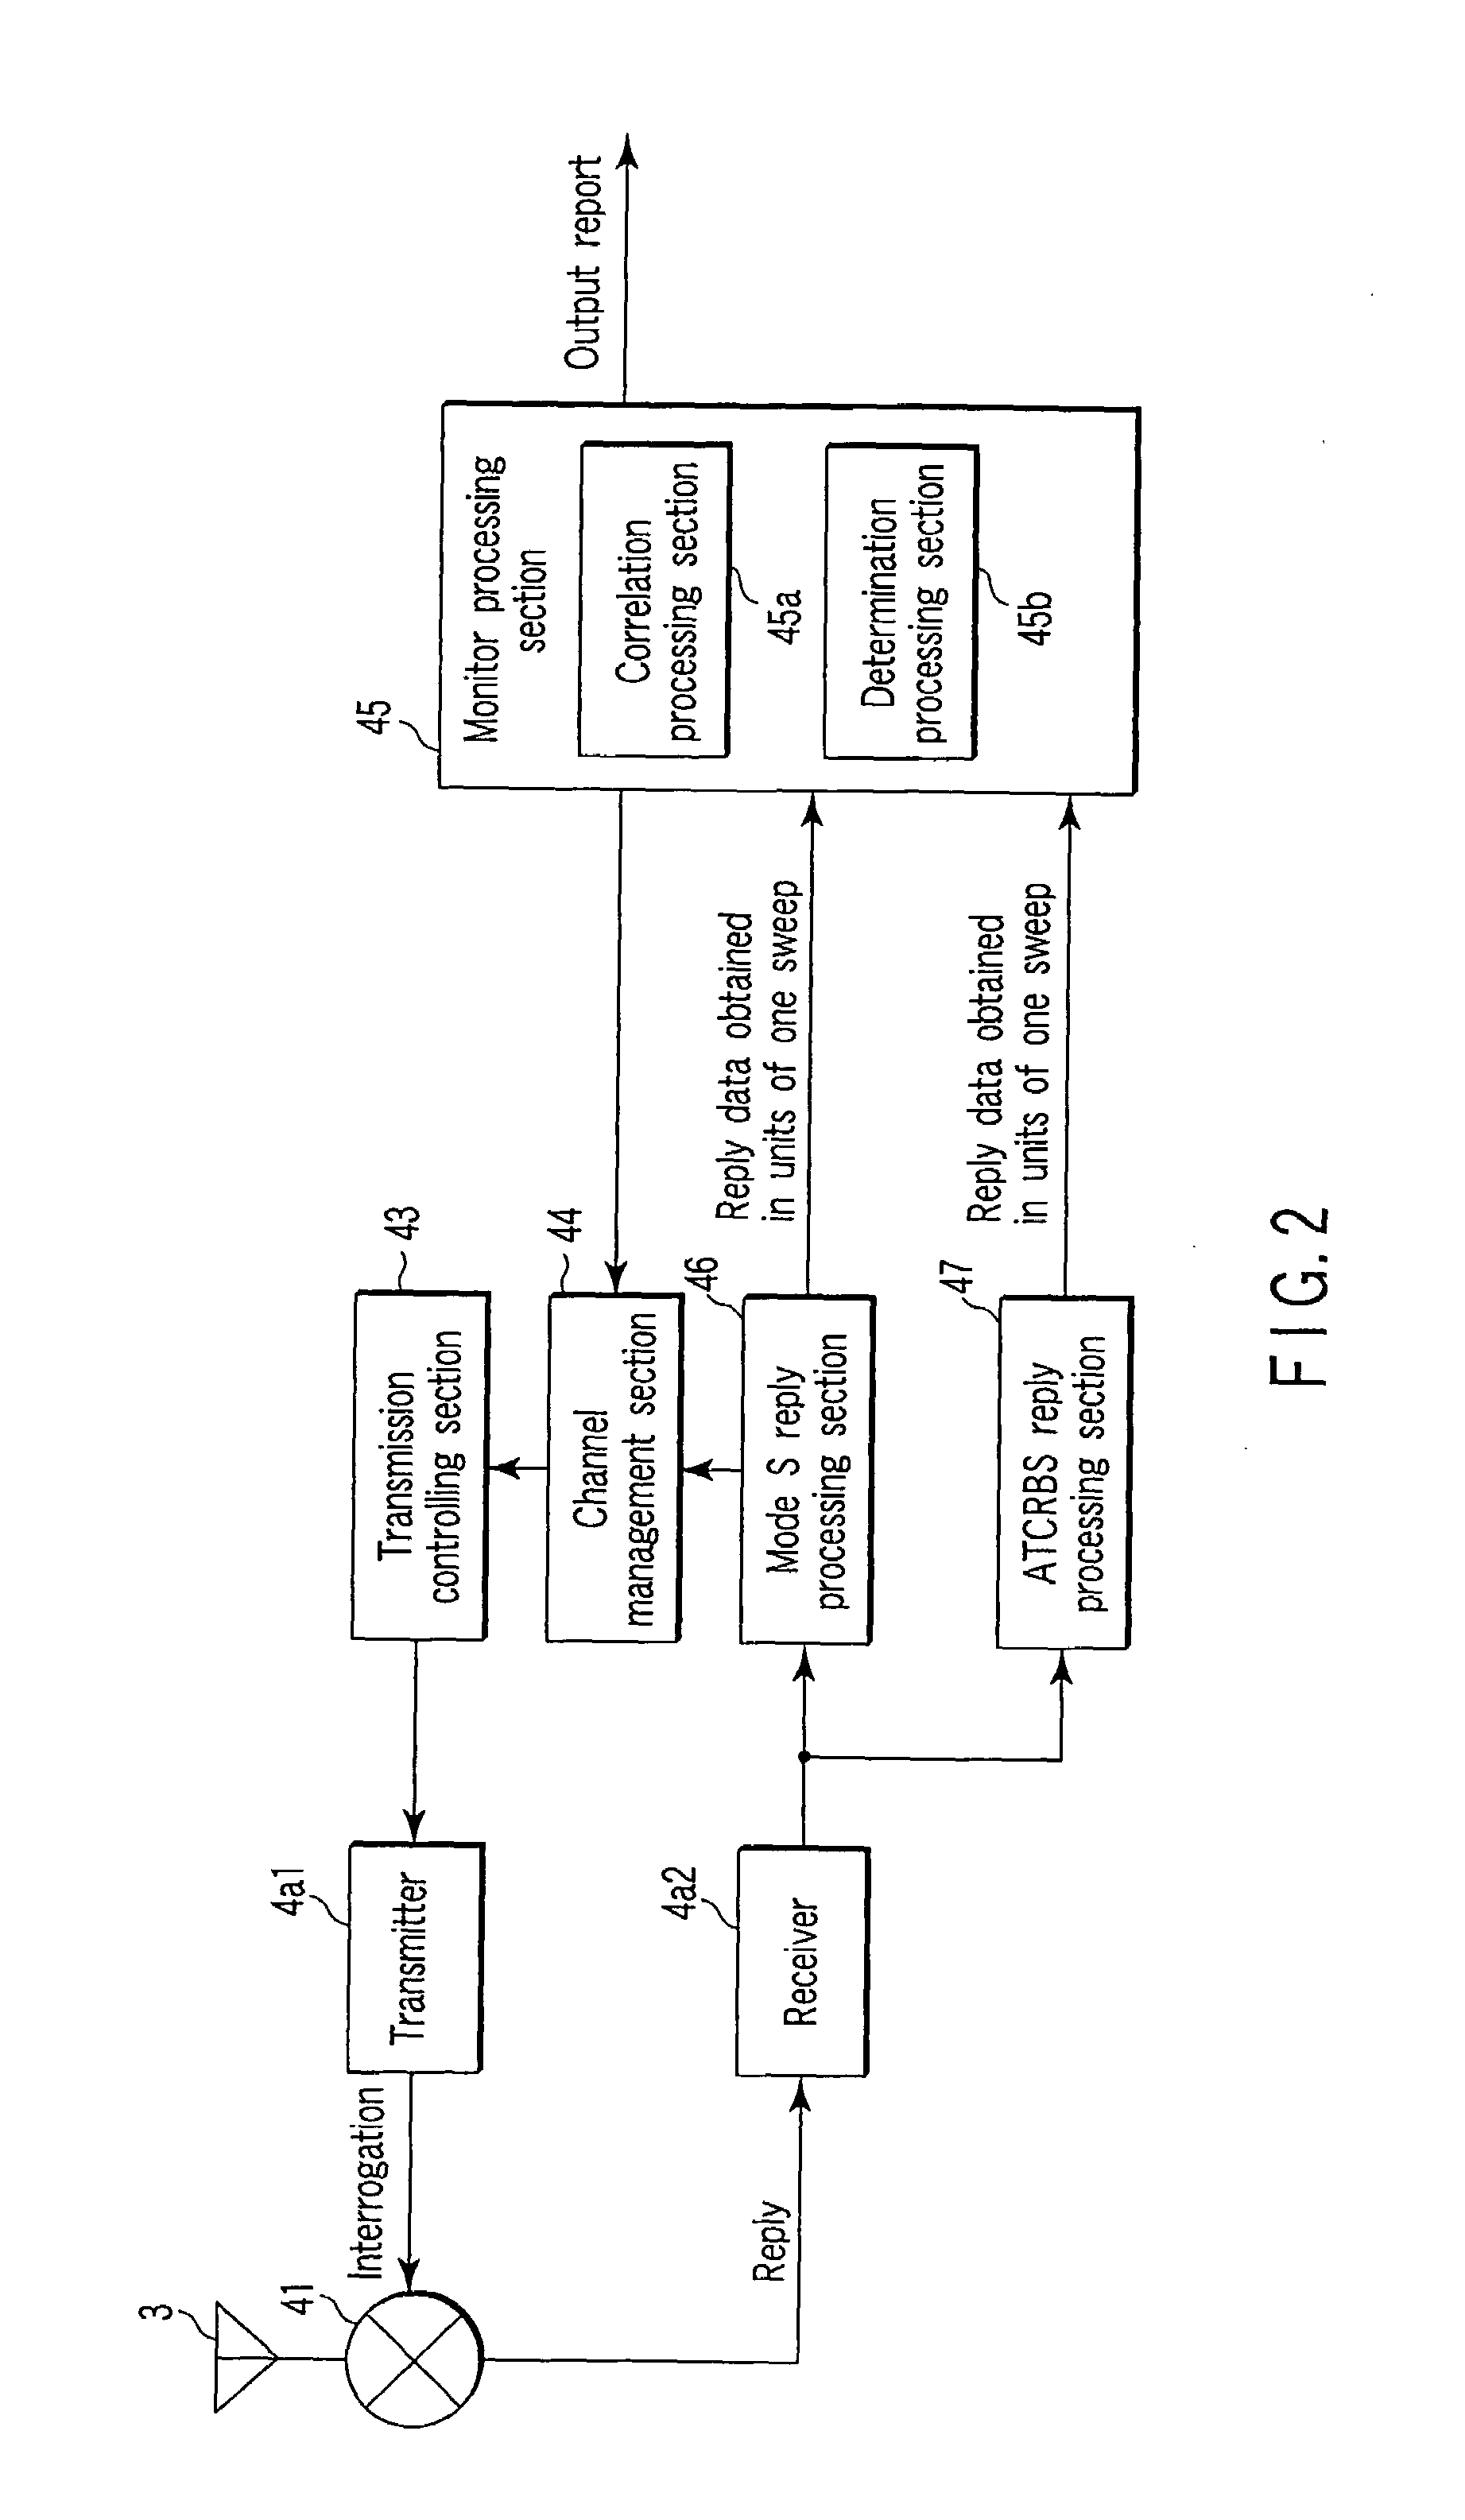 Secondary surveillance radar system, ground equipment for use therein, and response signal checking method applied thereto